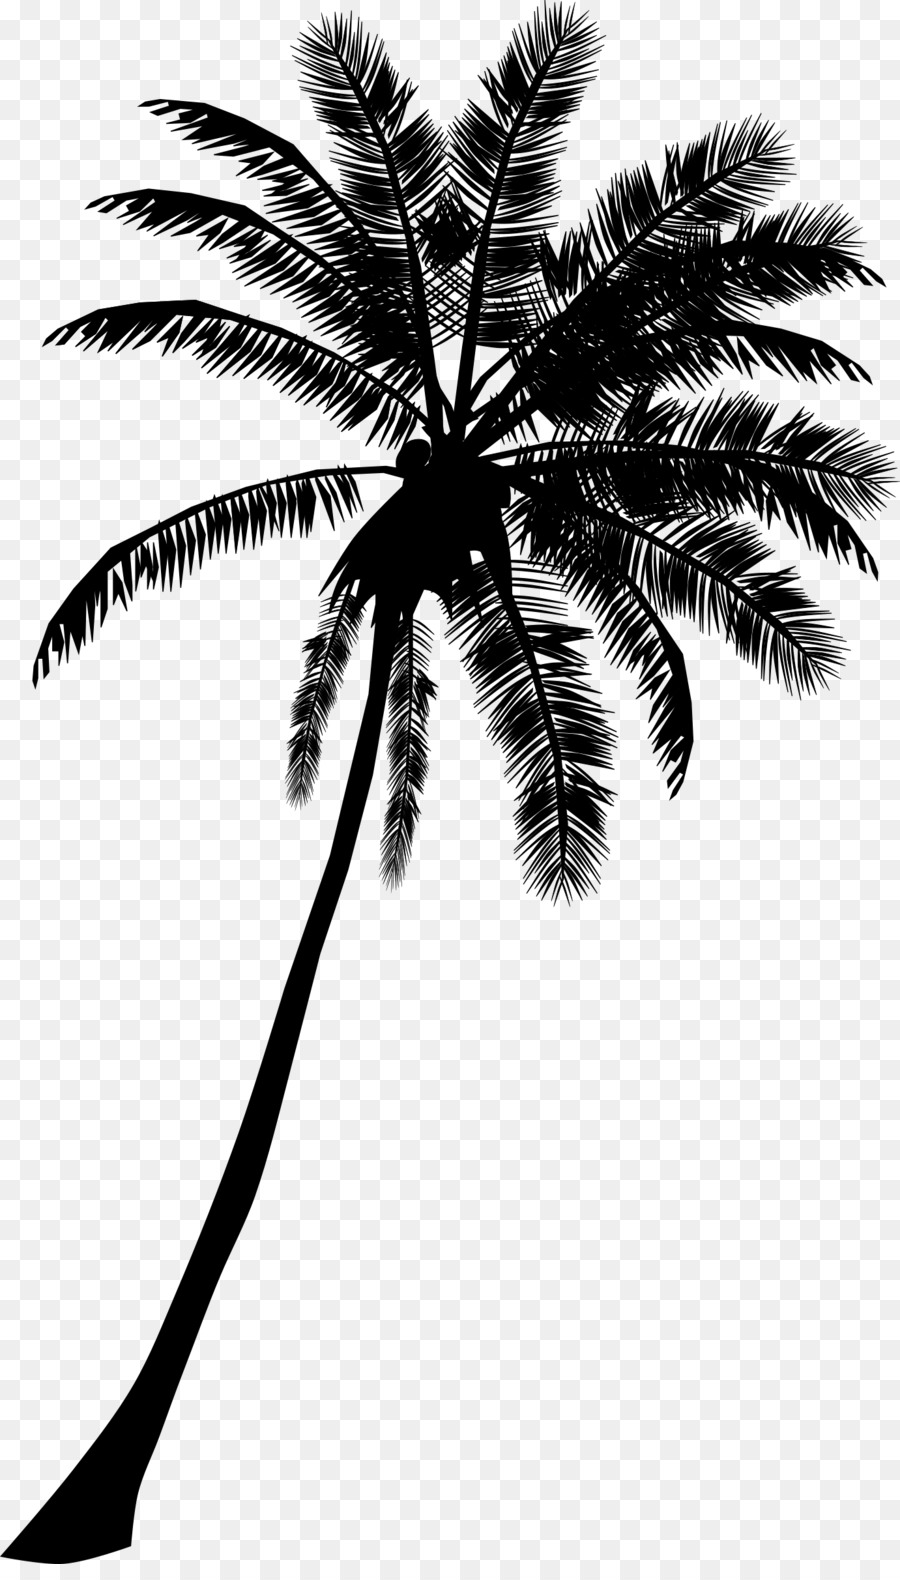 Arecaceae Tree Cdr Silhouette Clip art - coconut tree png download - 1381*2400 - Free Transparent Arecaceae png Download.